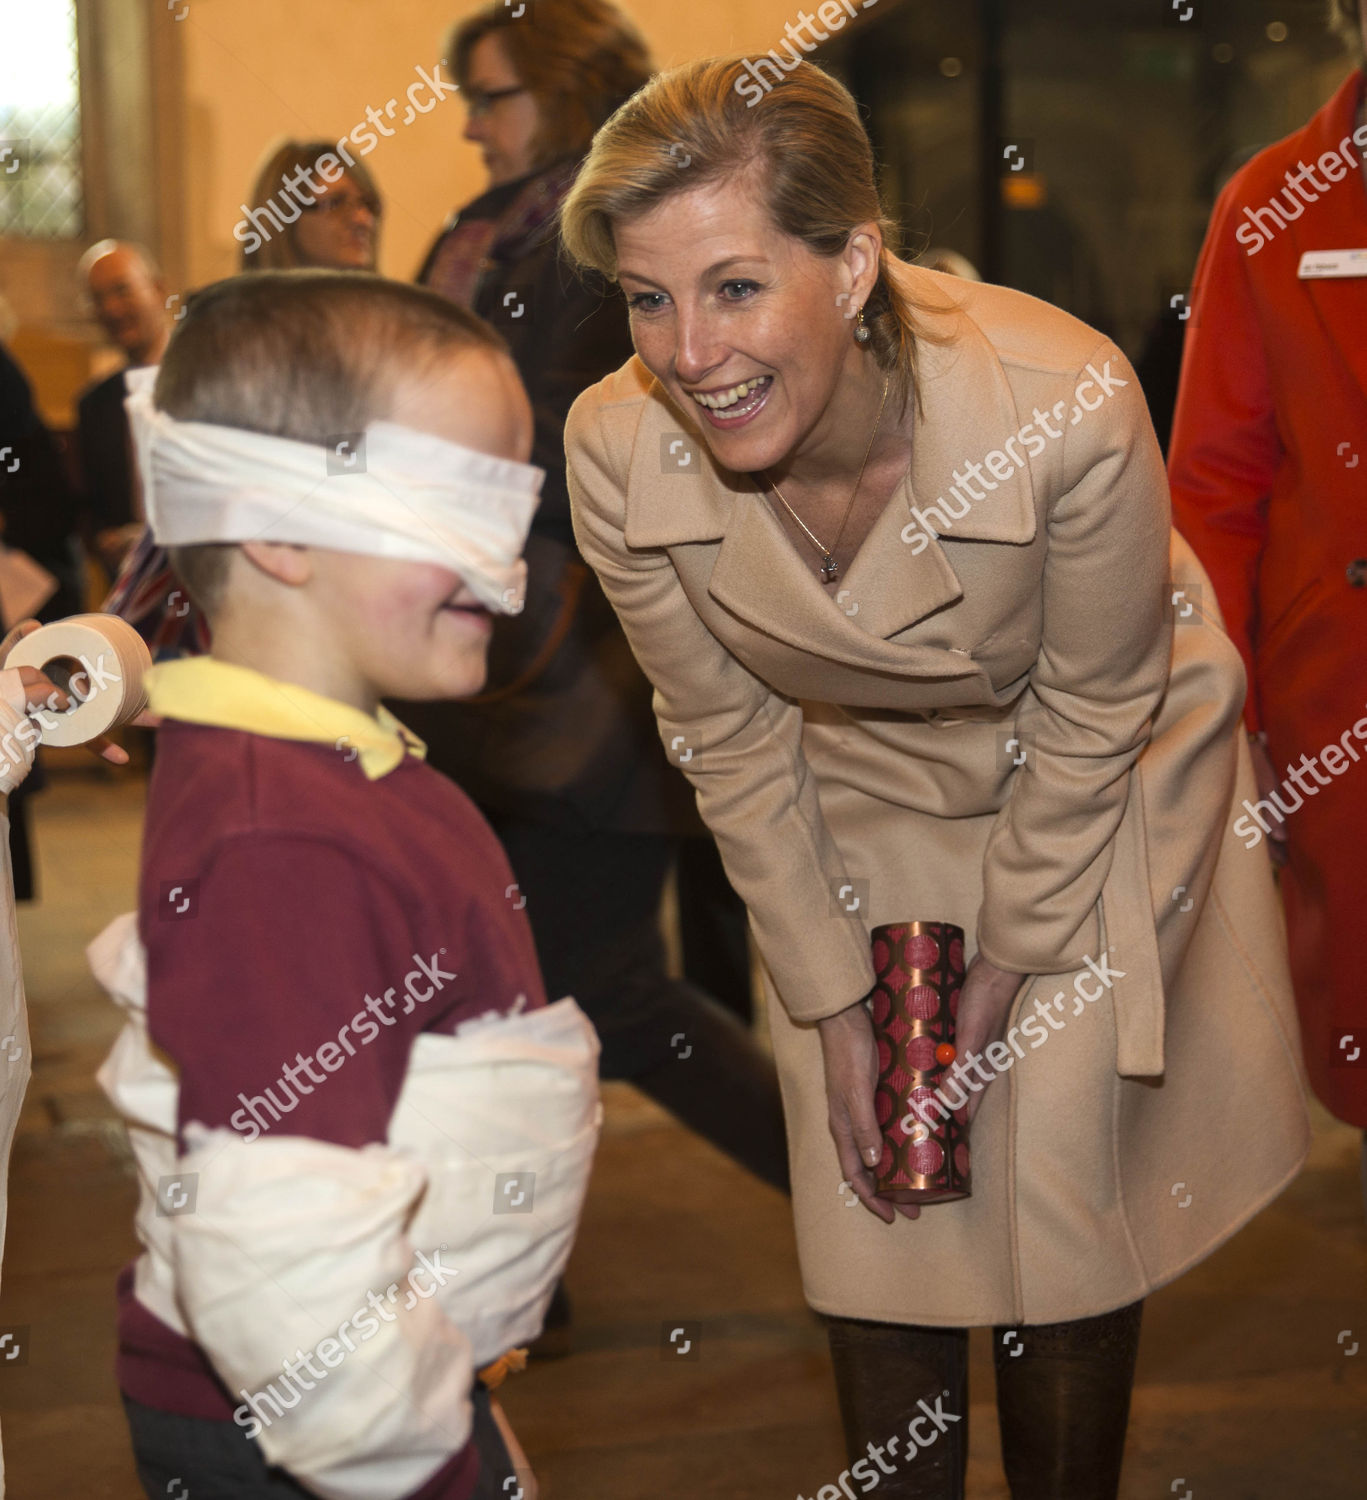 sophie-countess-of-wessex-visit-to-pact-parents-and-children-together-at-dorchester-abbey-britain-shutterstock-editorial-3565183e.jpg